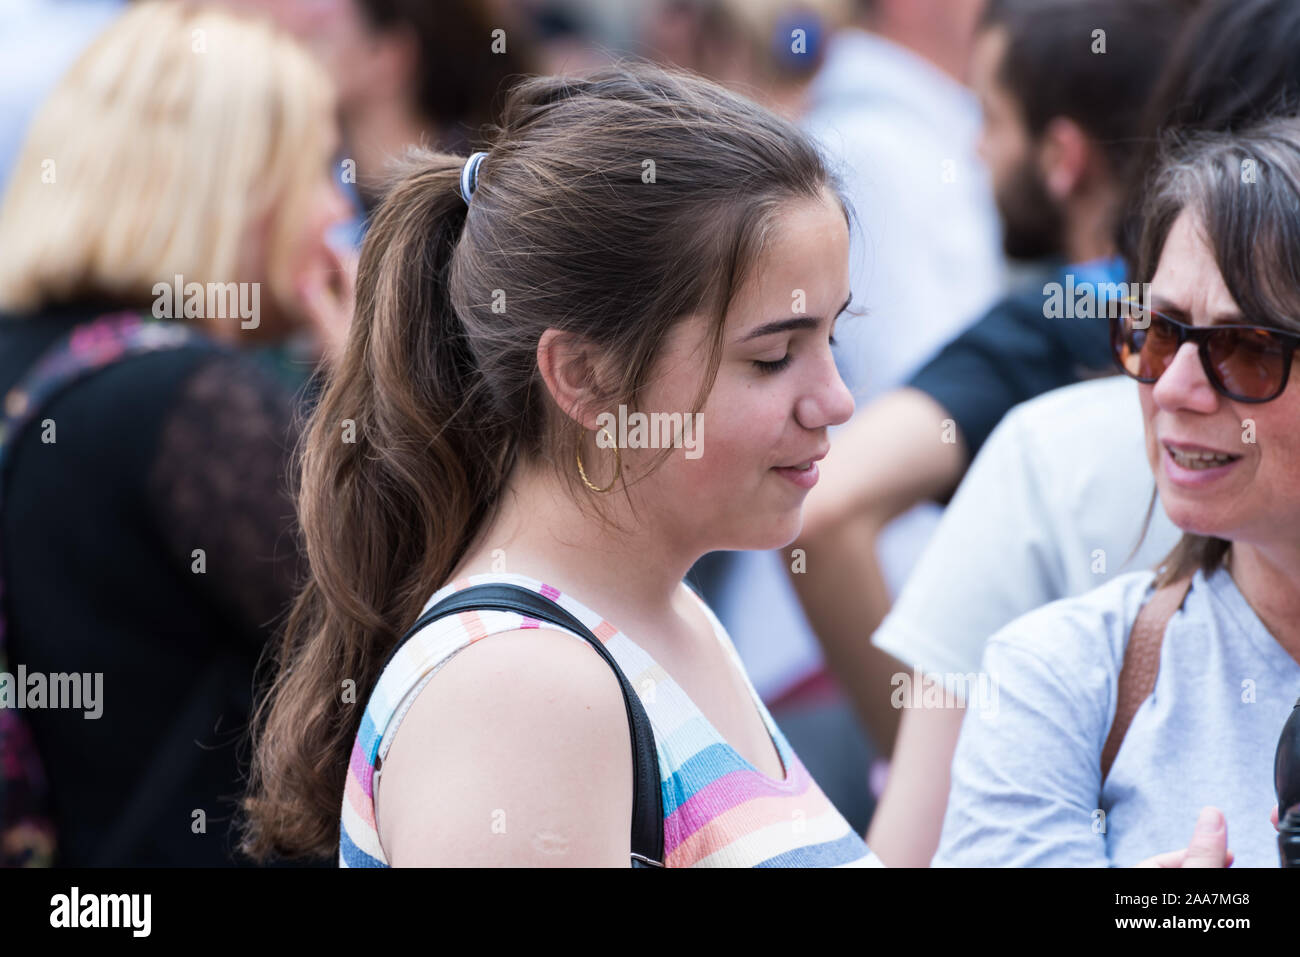 Brussels Old Town / Belgium - 07 05 2019: Laughing teenage daucghter and her mother talking at Grande Place Brussels Stock Photo